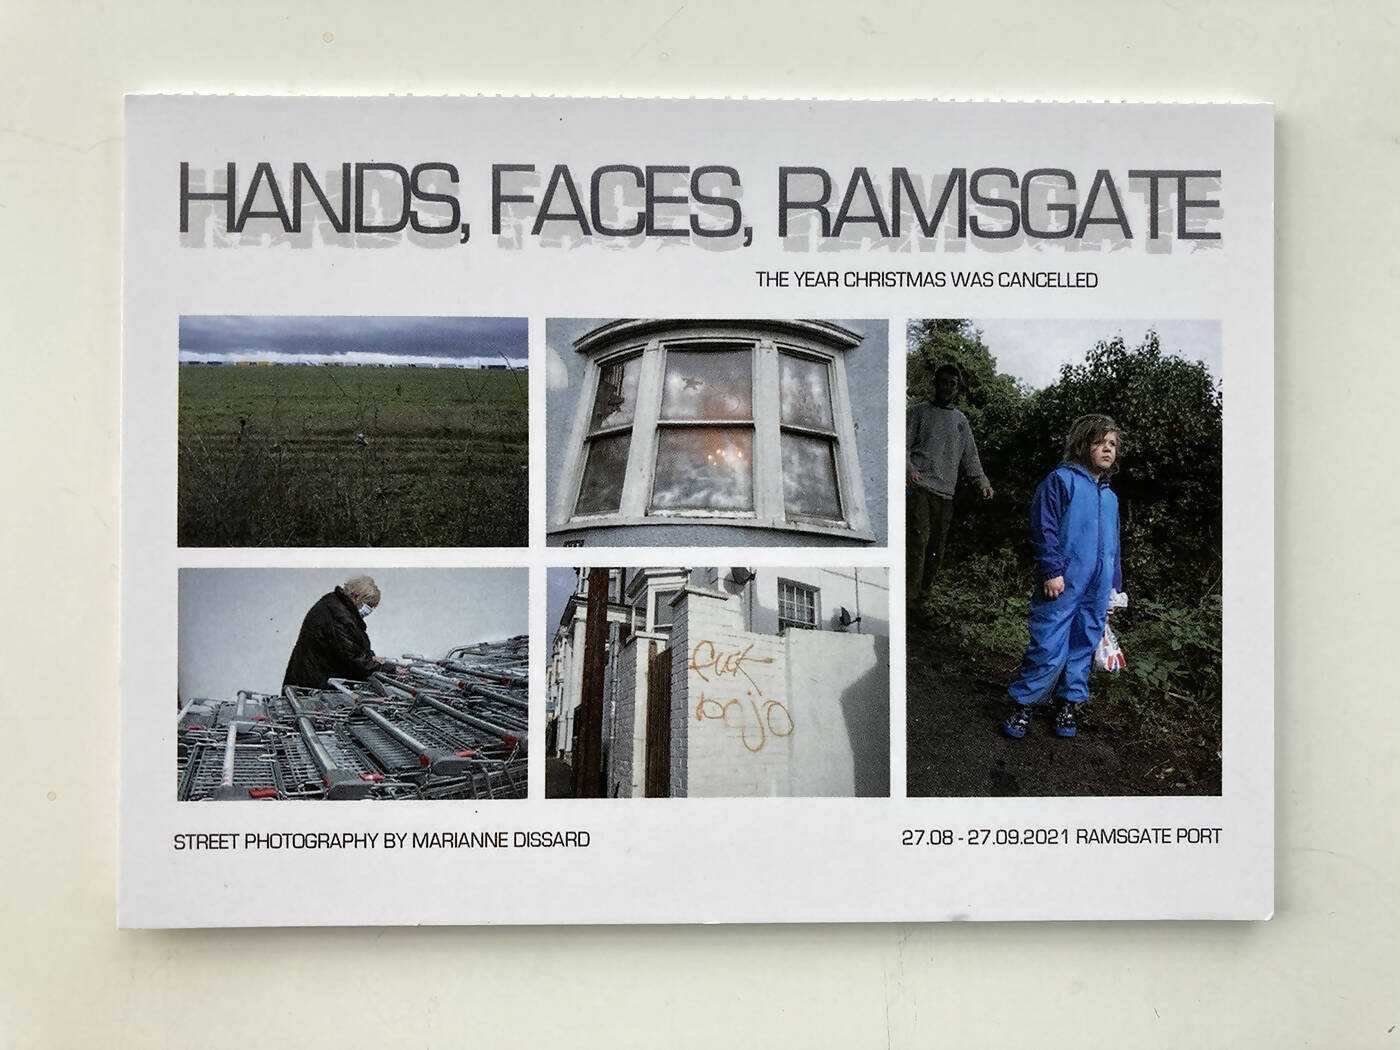 Hands, Faces, Ramsgate: The Year Christmas Was Cancelled (2021) - Marianne Dissard